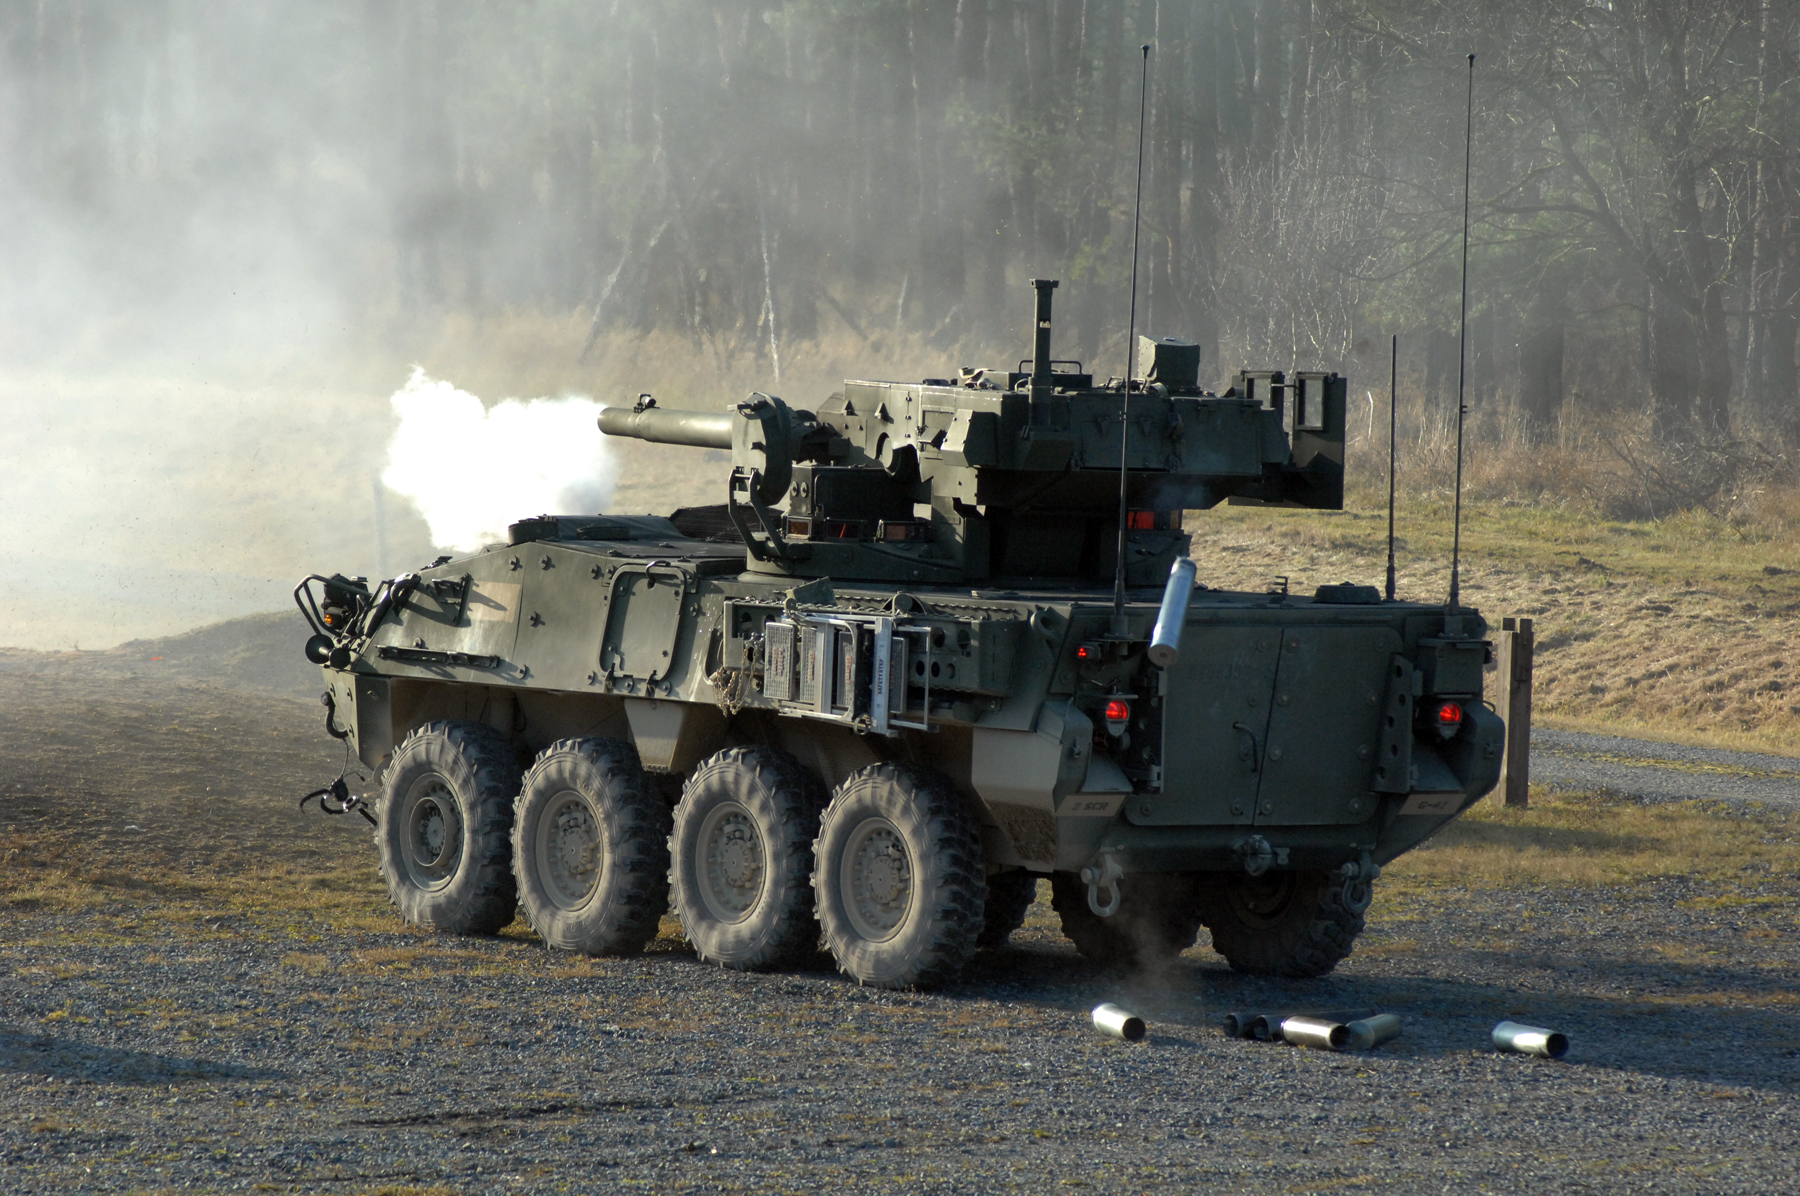 a large army vehicle on the road with its cannon fired